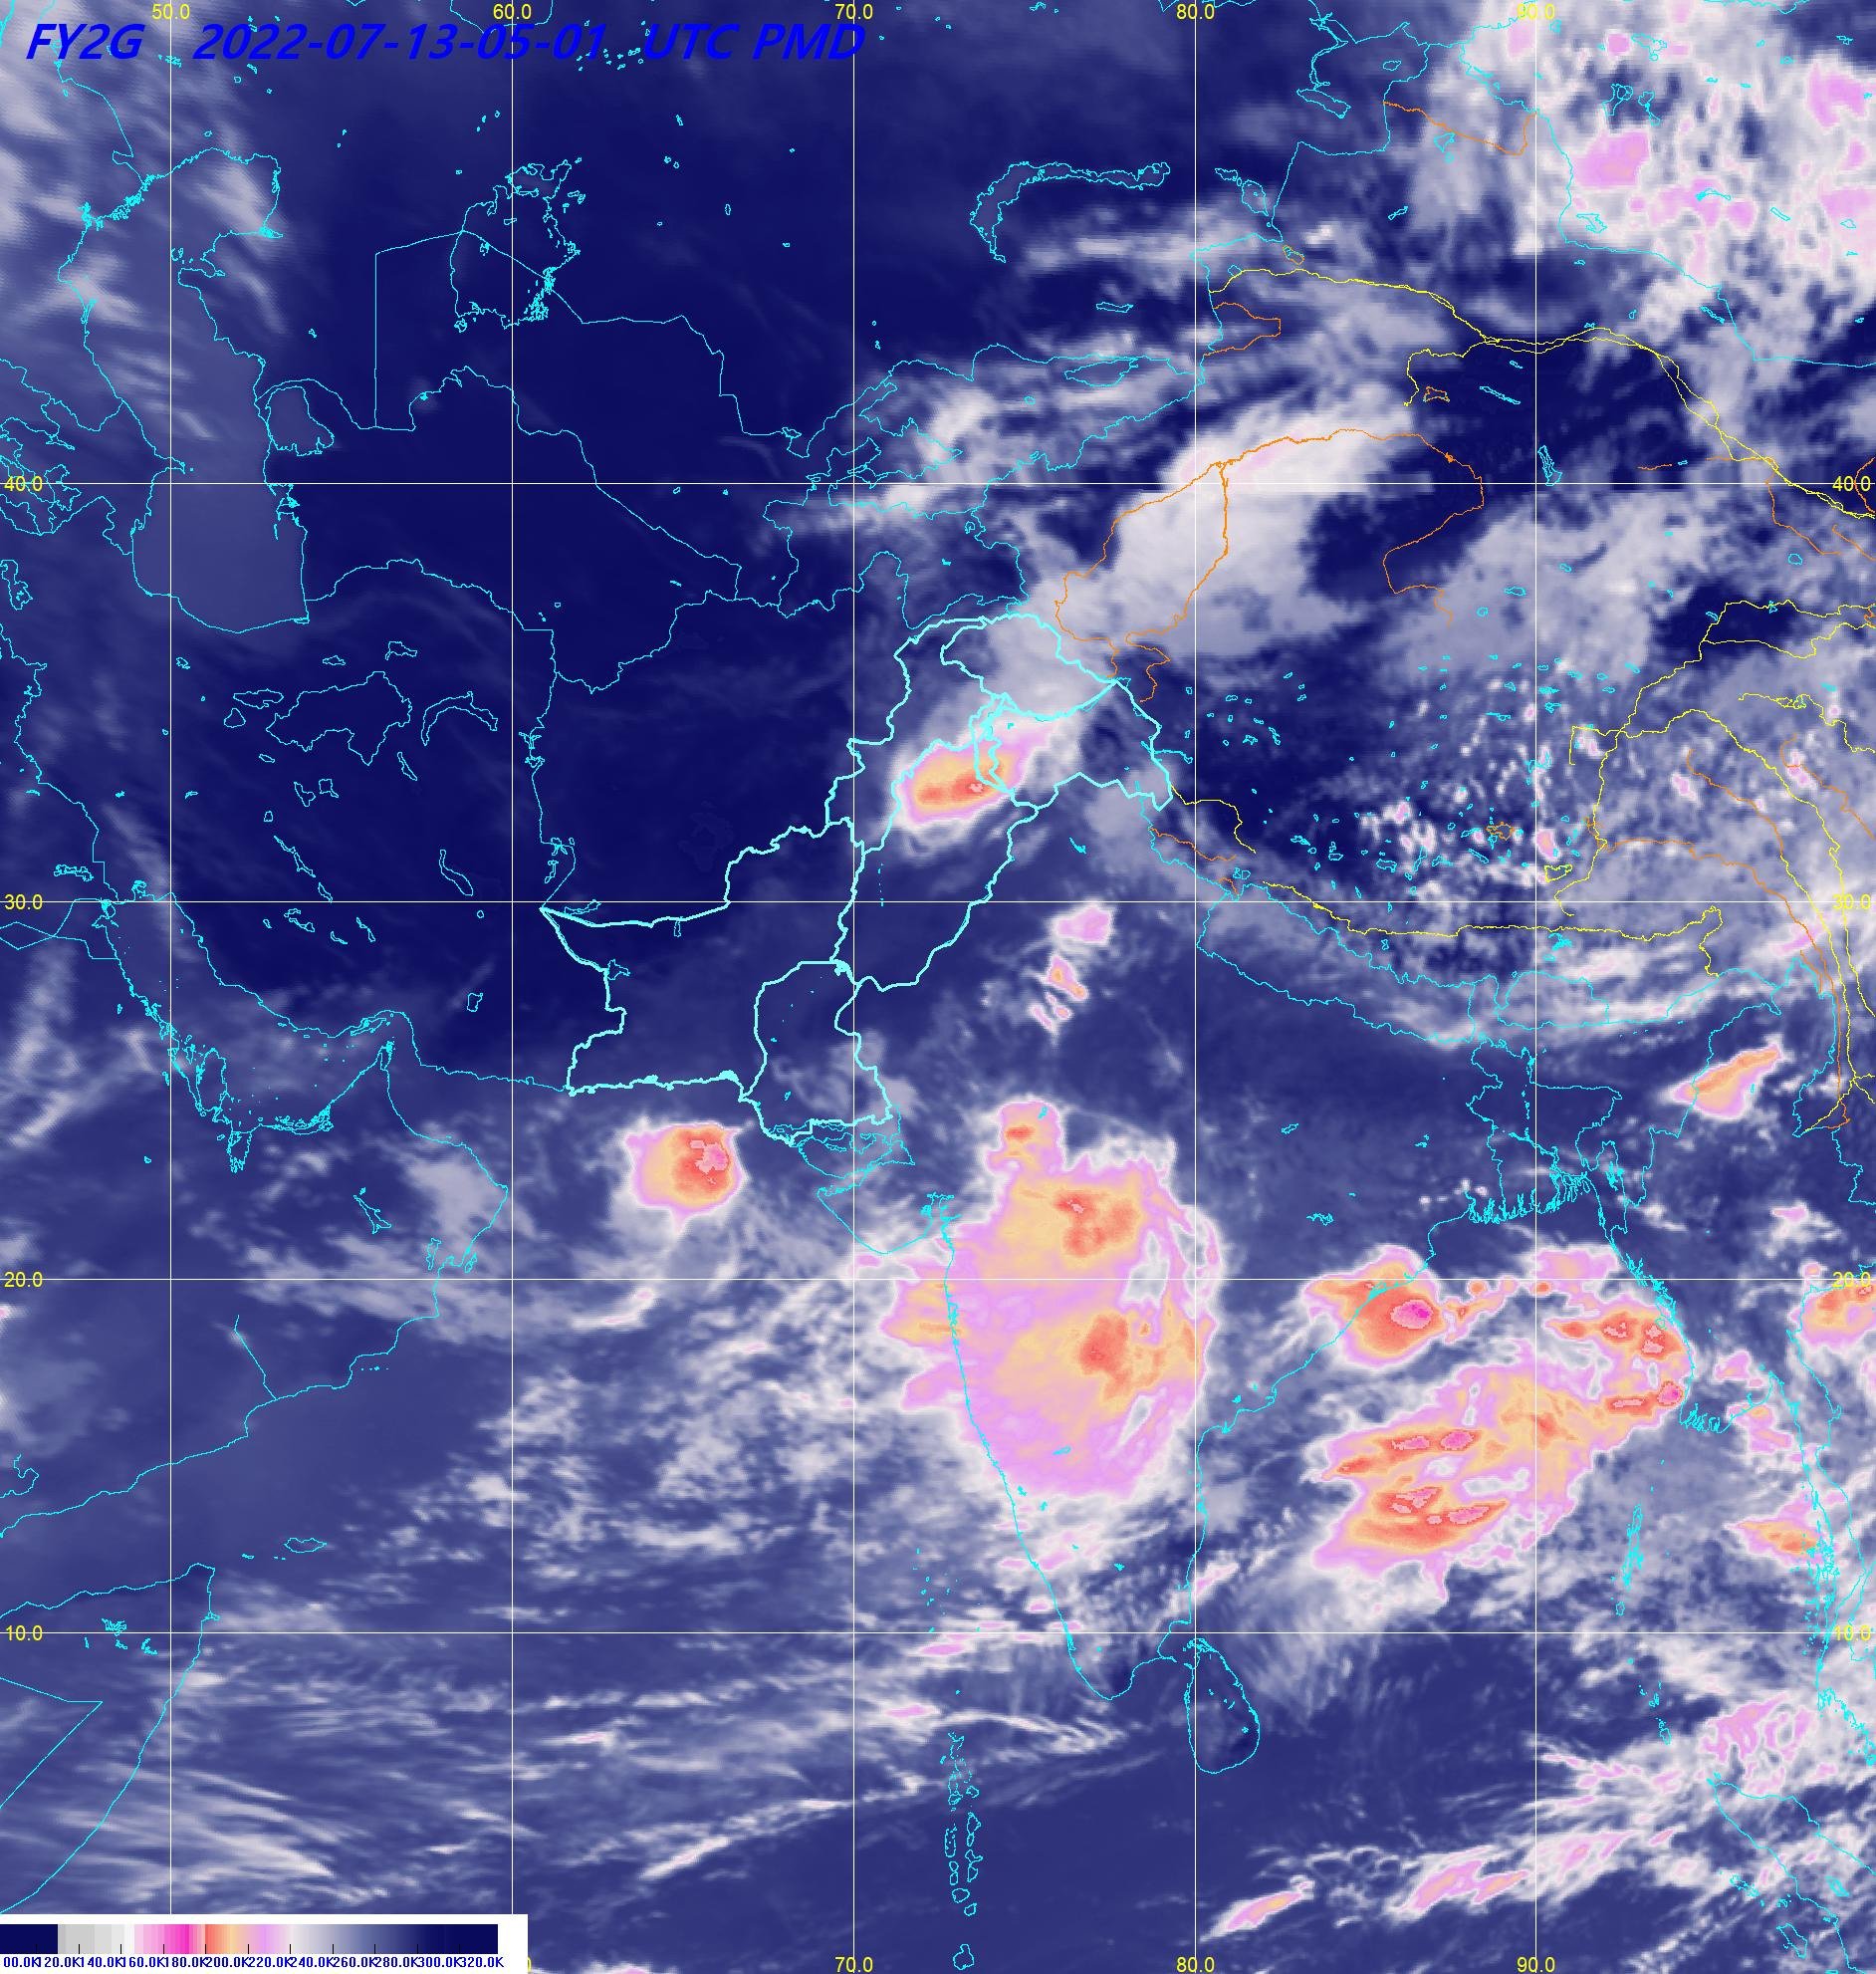 The latest PMD satellite image shows a weather system moving towards Sindh.